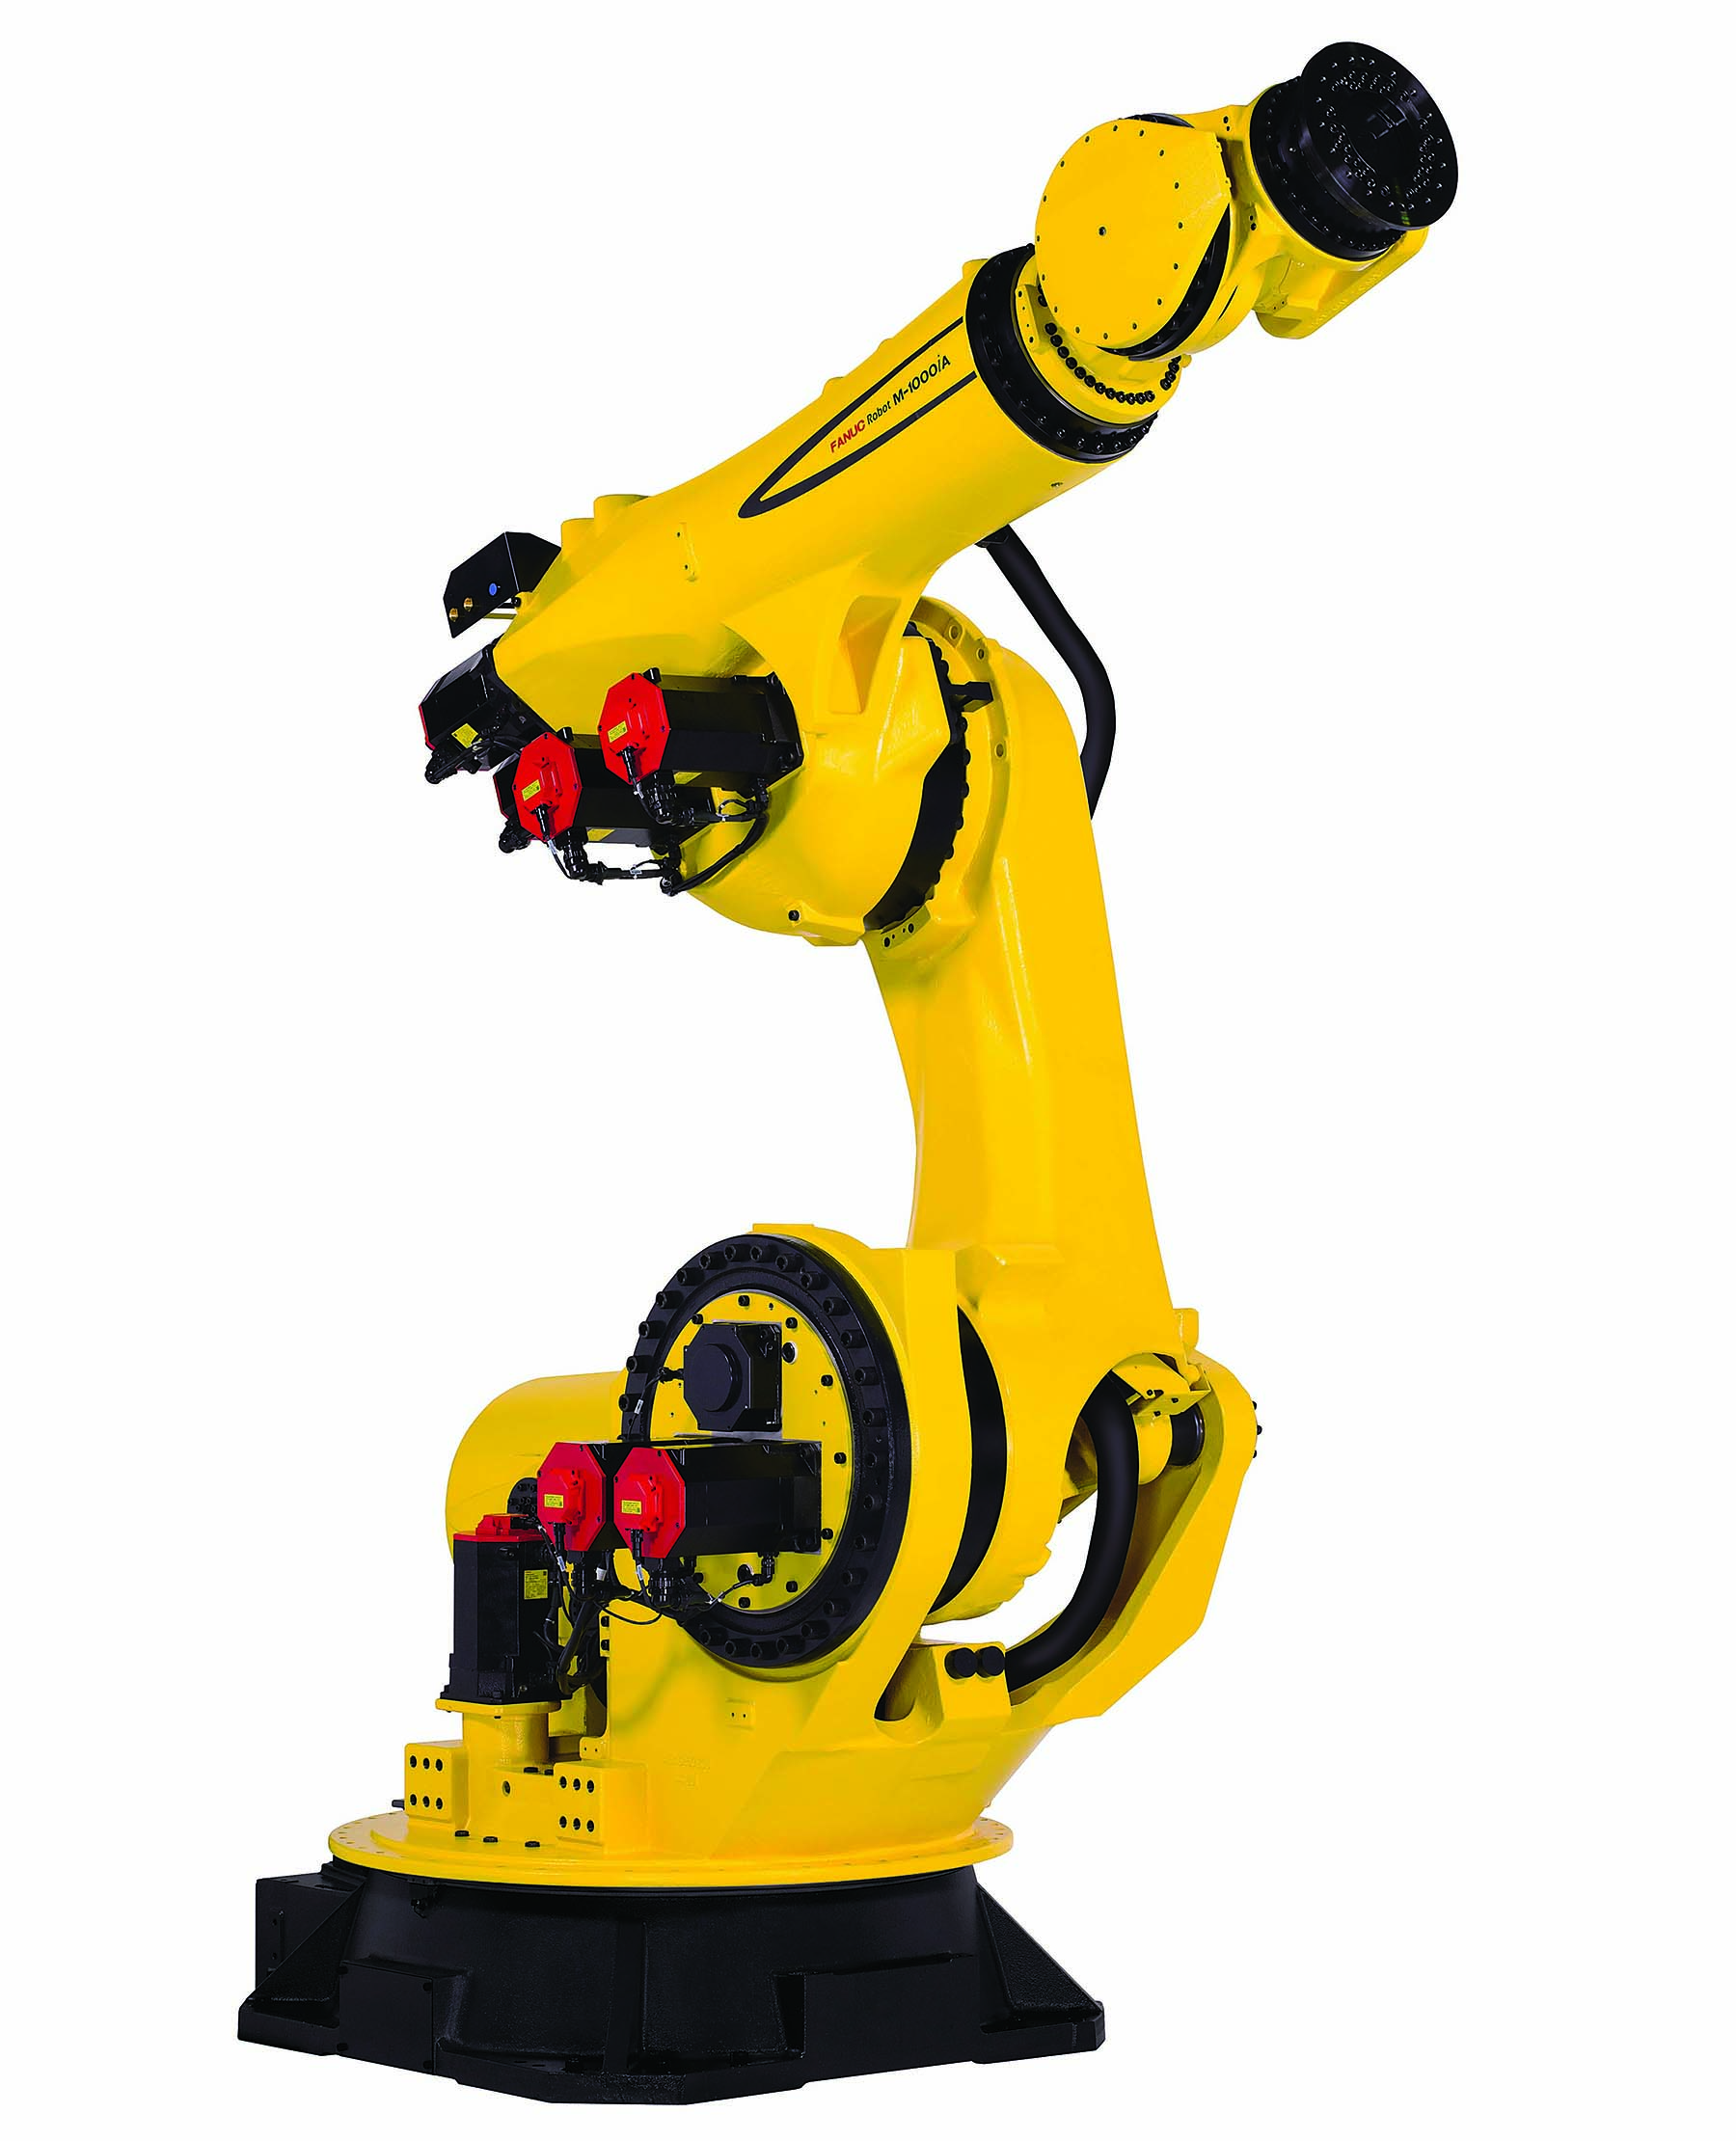 Capable of handling 1,000 kg items, the six-axis M-1000iA industrial robot also features a design that allows a wider range of motion than other heavy-payload robot arms. 